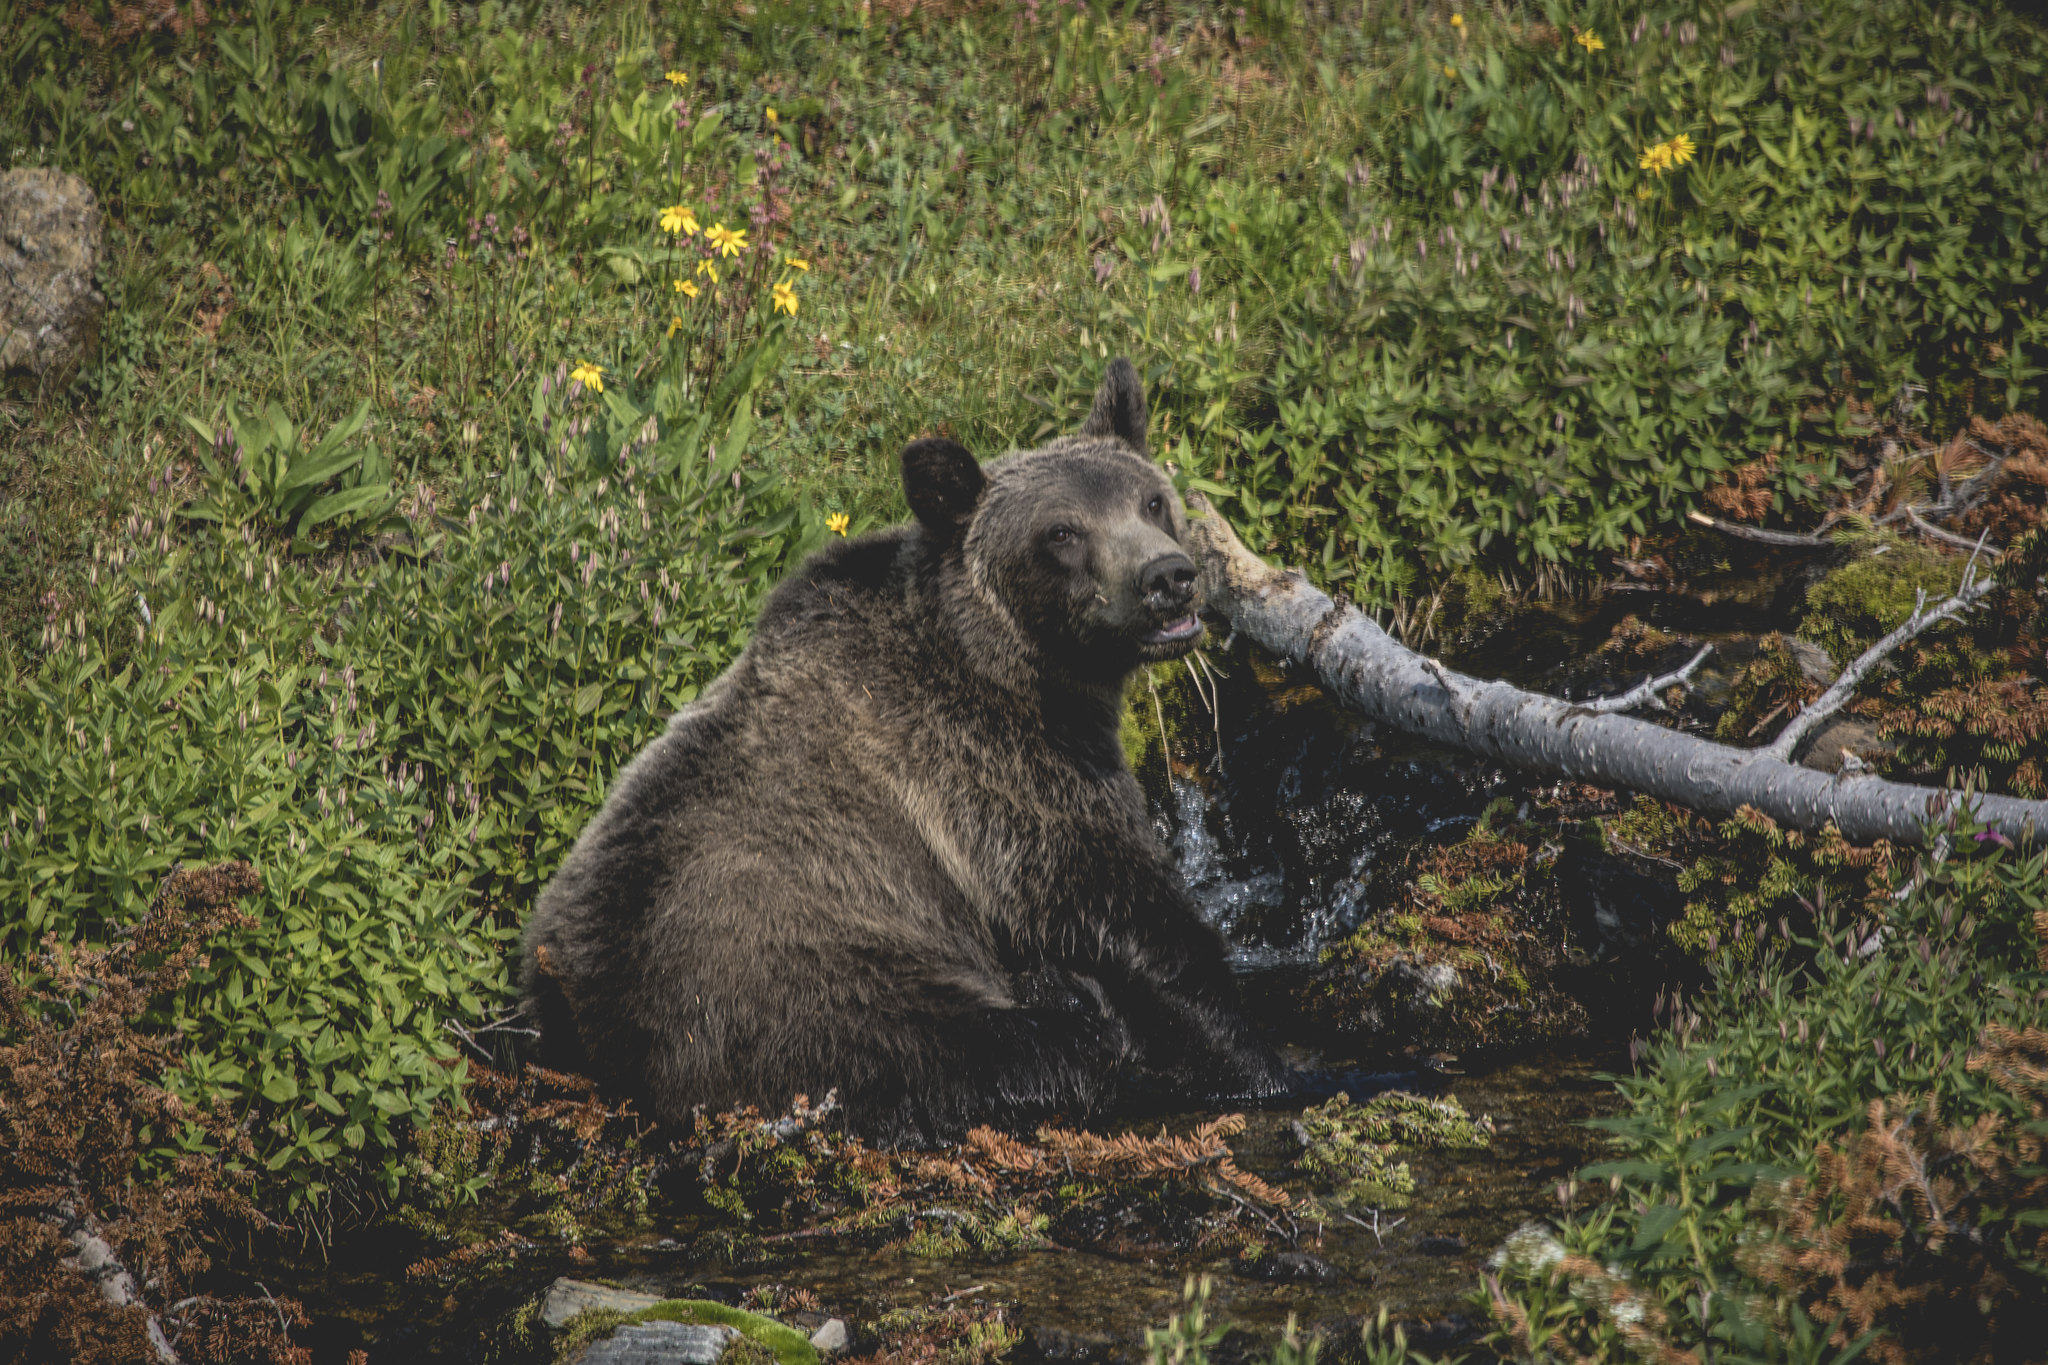 A grizzly bear sitting in a creek